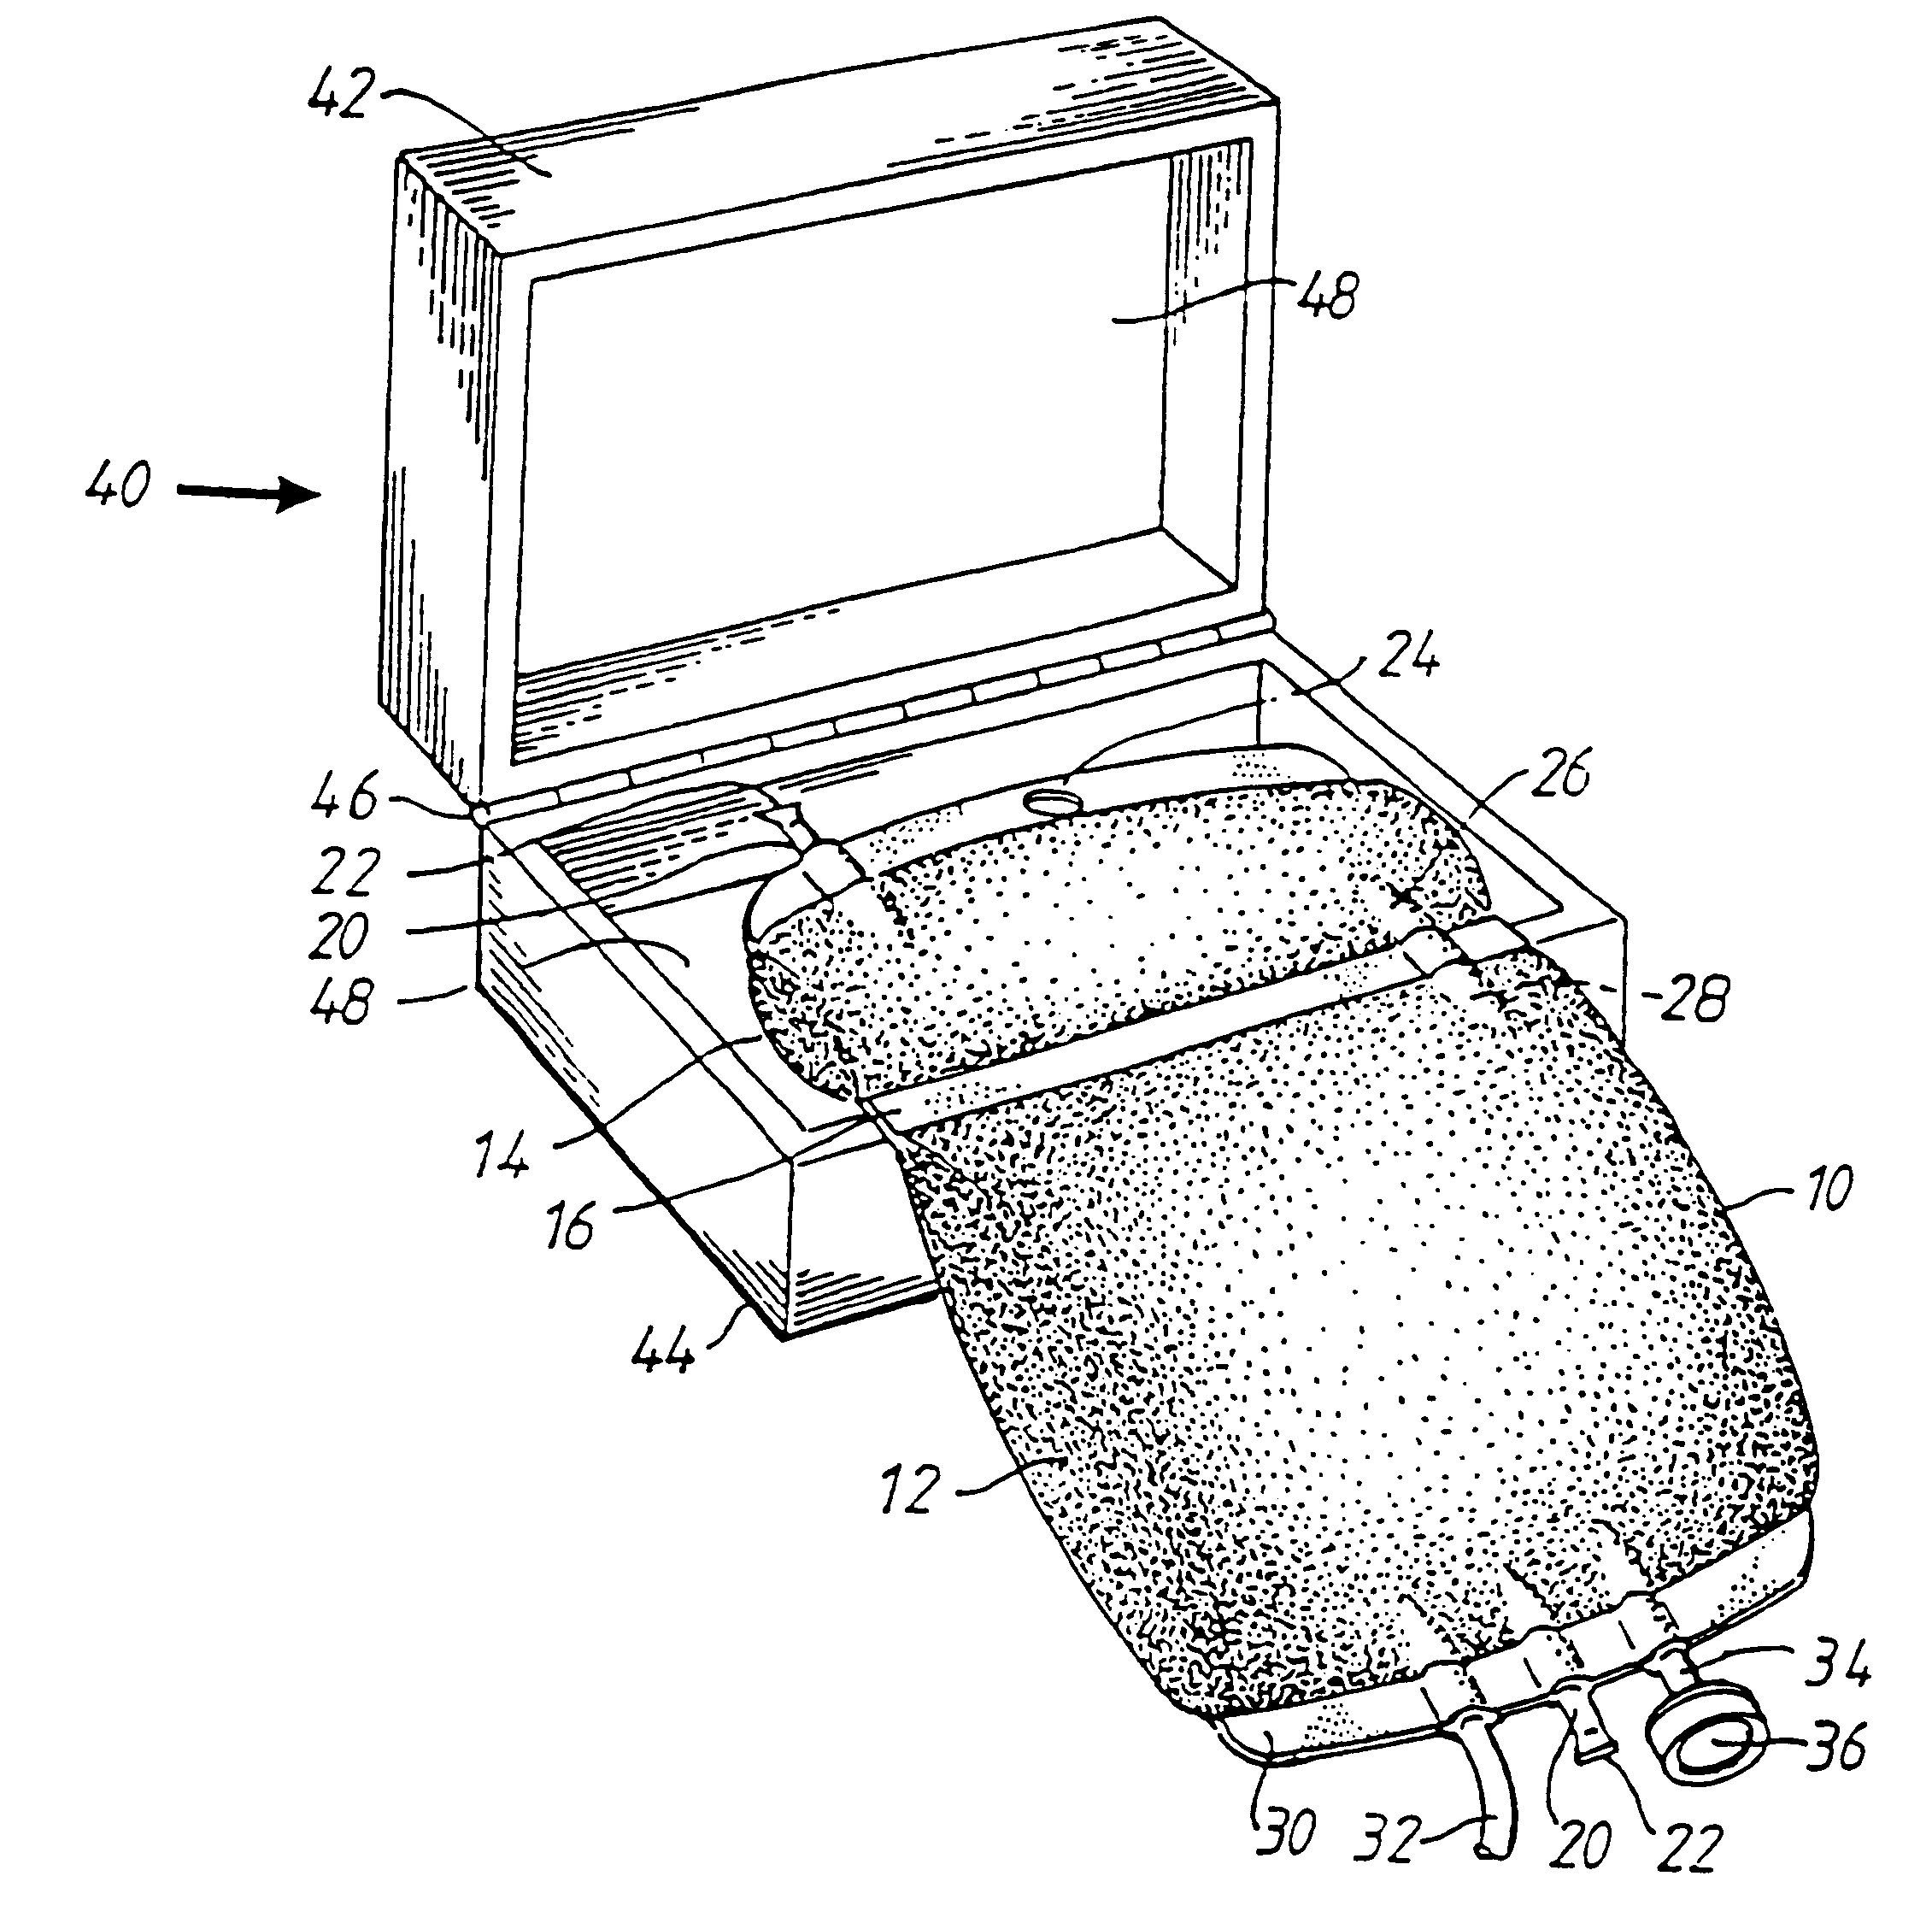 Method and apparatus for reducing the degradation of heat sensitive components in medical substances during heat sterilization